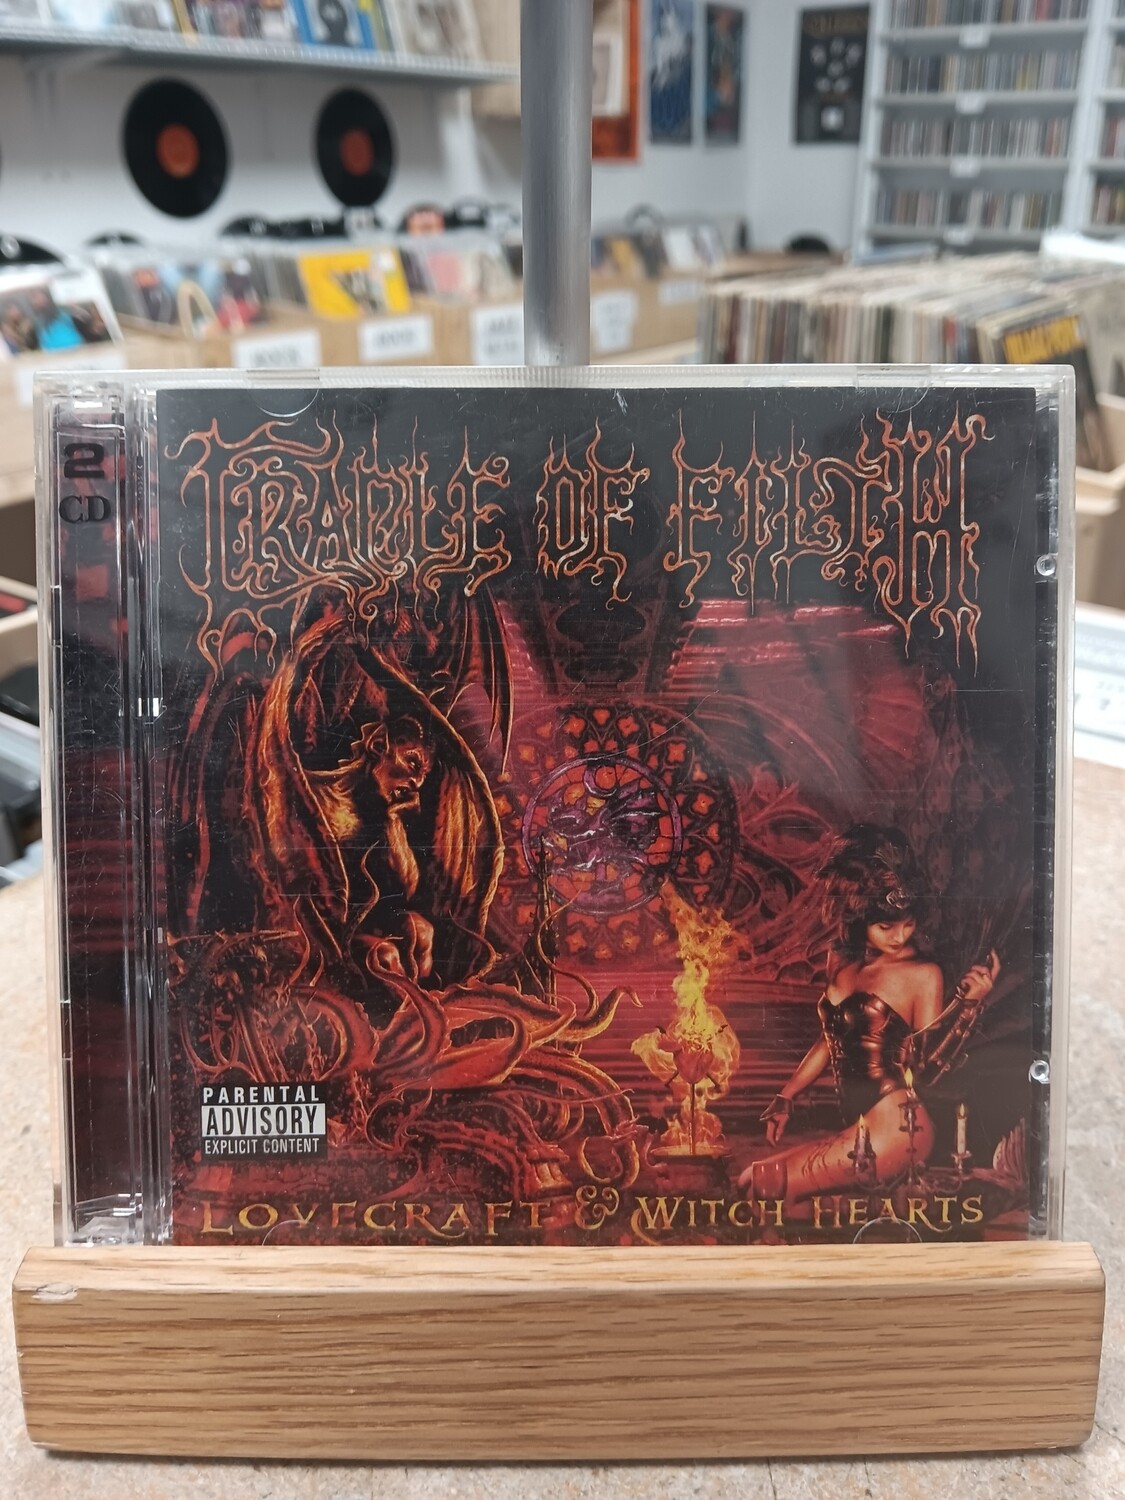 Cradle of Filth - Lovecraft & Witch Hearts (CD)